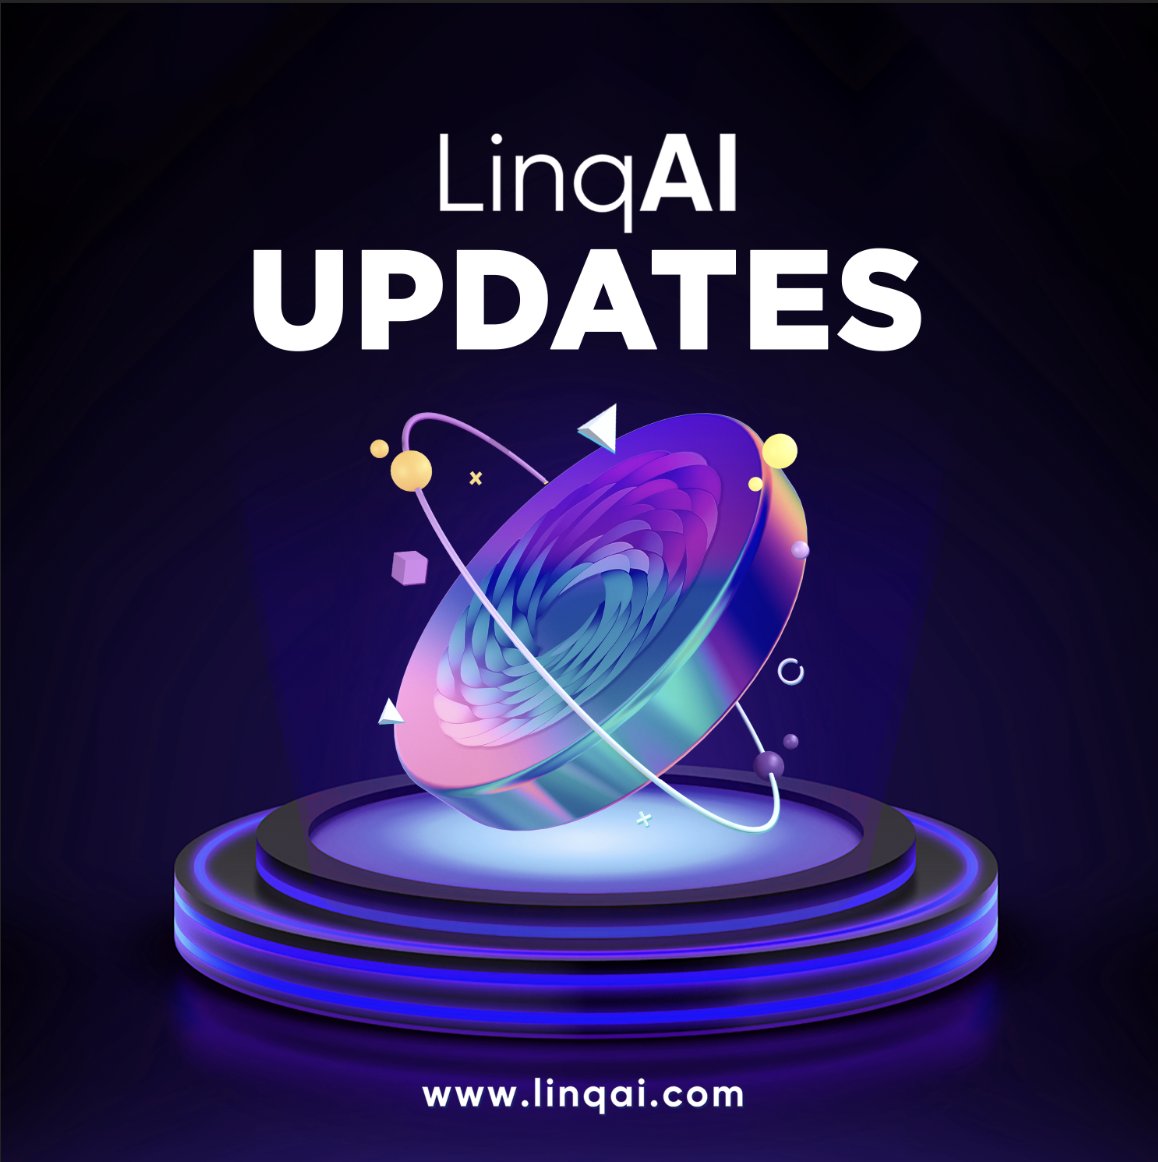 🔥We have burned the 2,050,000 $LNQ for April 0x2f64a08504d3f96801db661ee67f45c199bb7f01fa47581dc5c16873d60a0b79 This takes the total sum of tokens burned to date to over 7,500,000 $LNQ 😋🔥